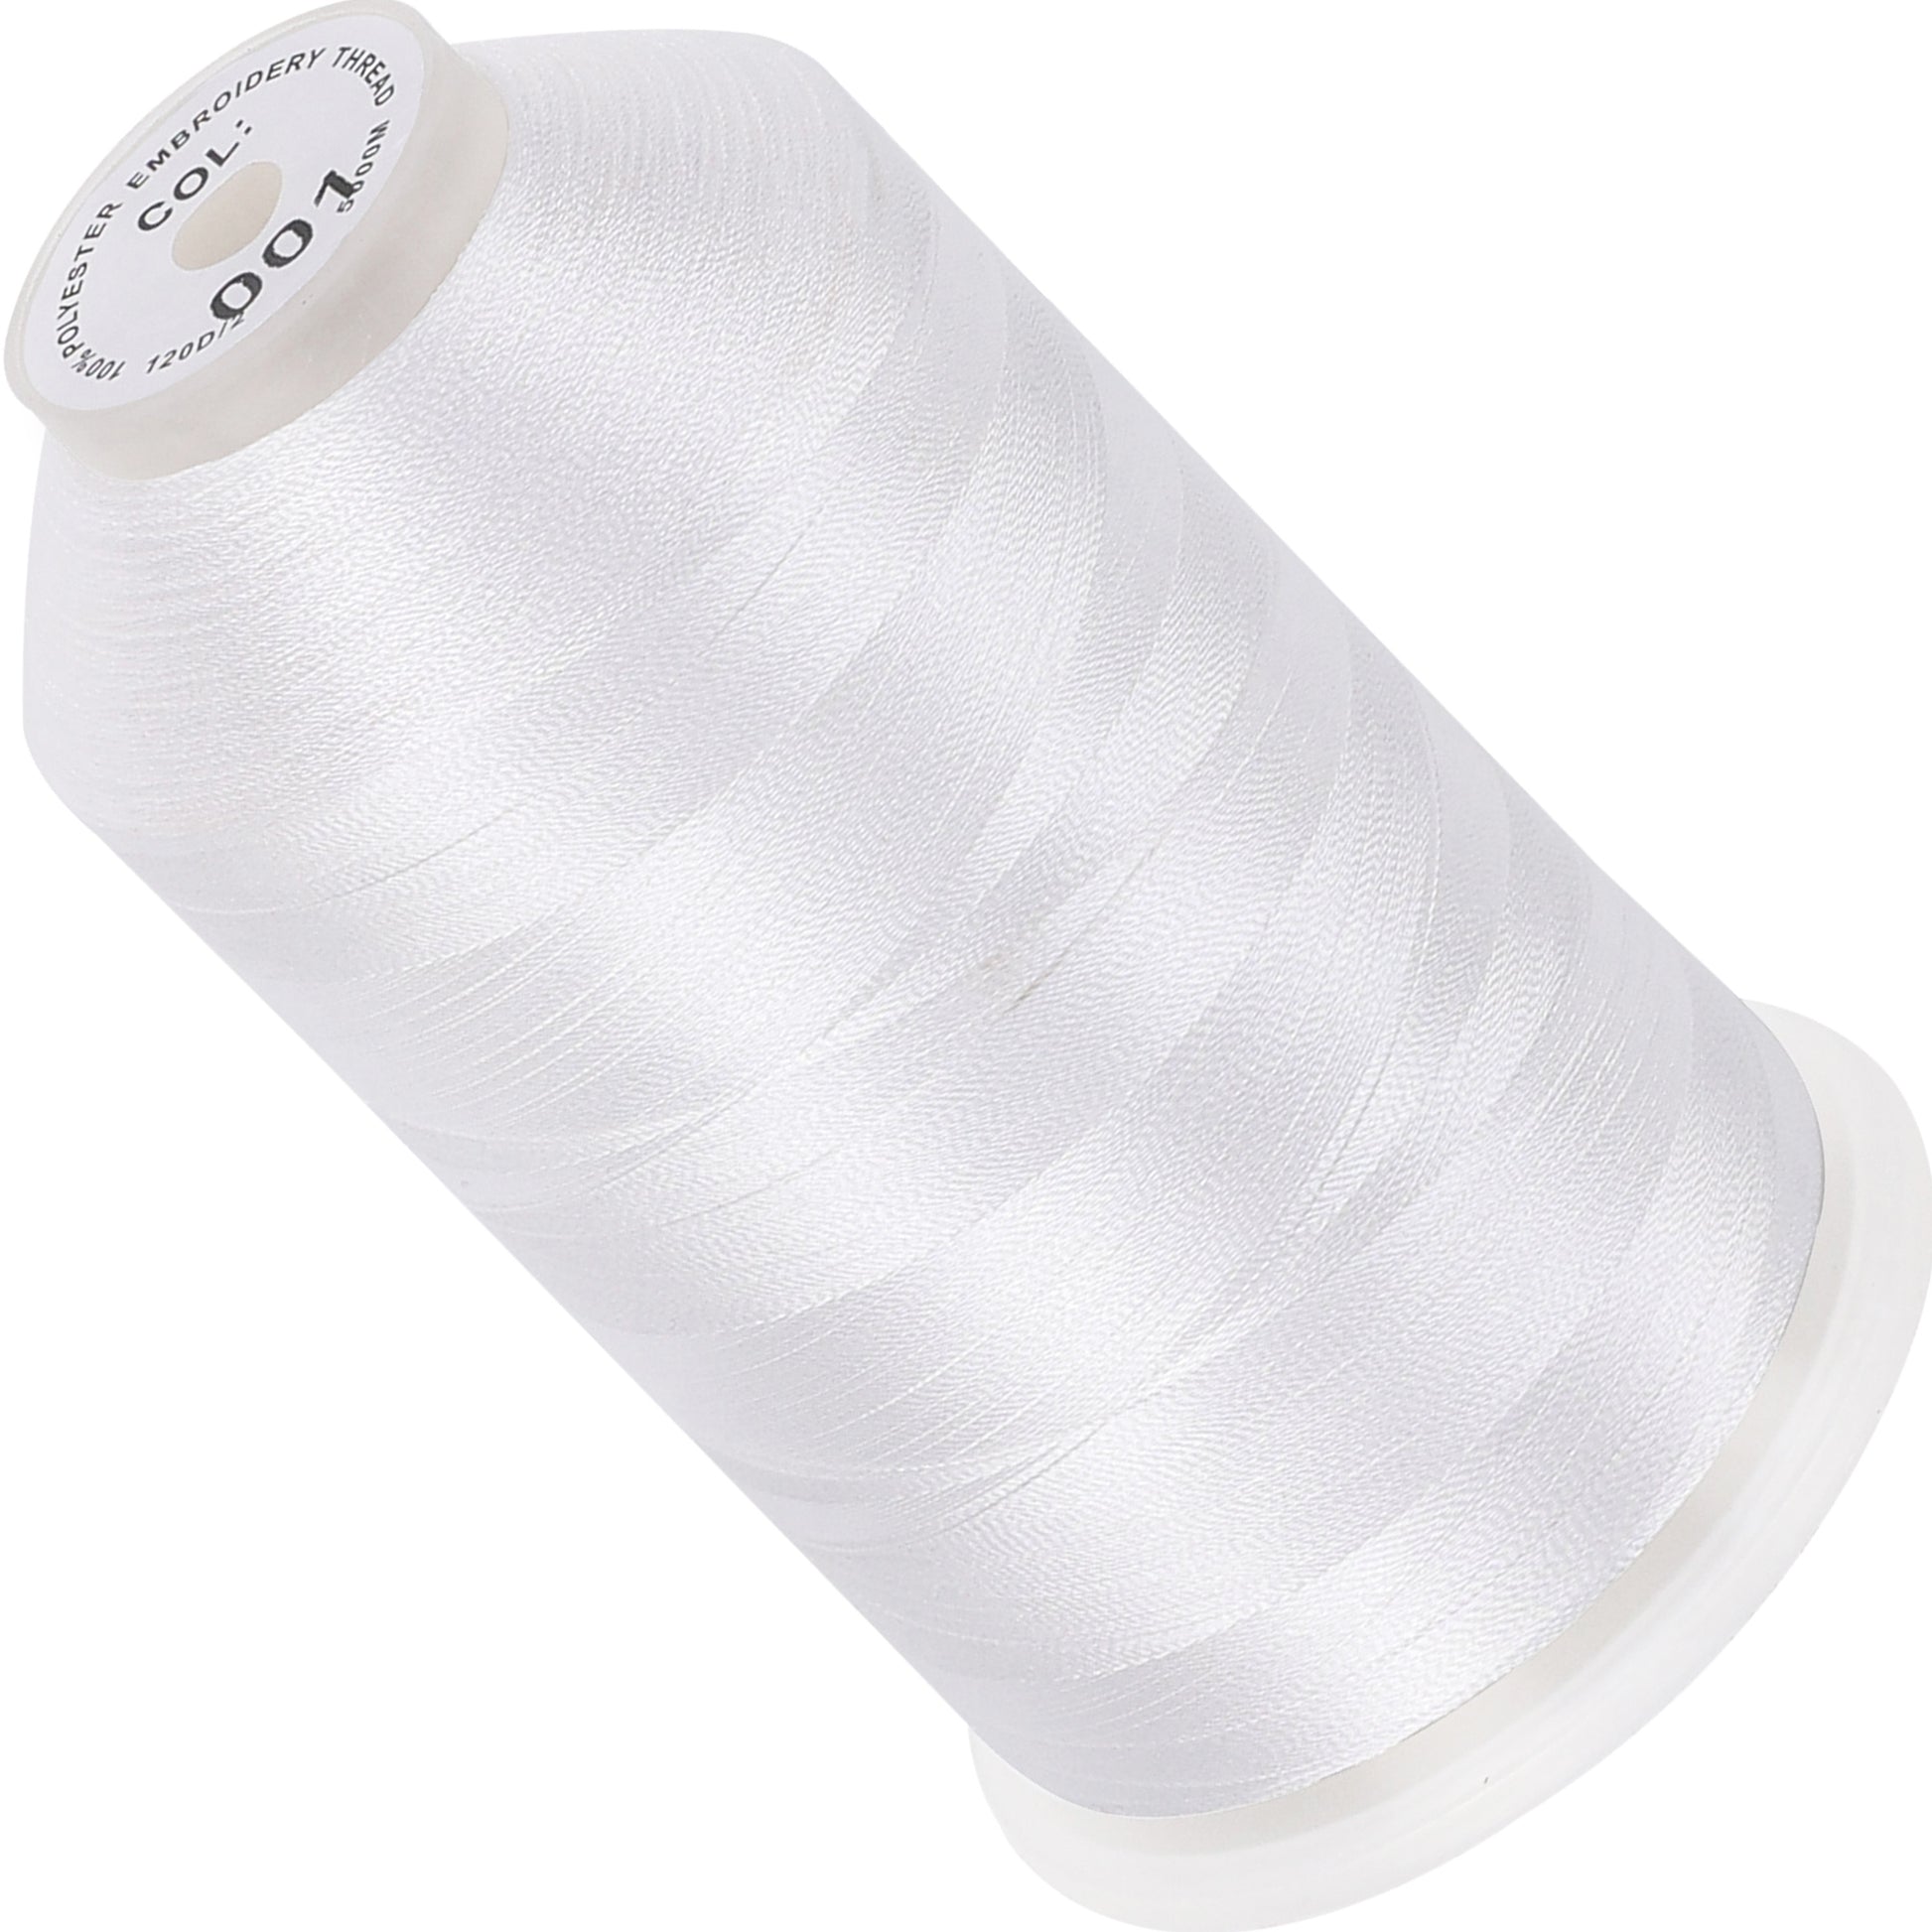 2 Spools of 5000M Embroidery Thread – Smartstitch